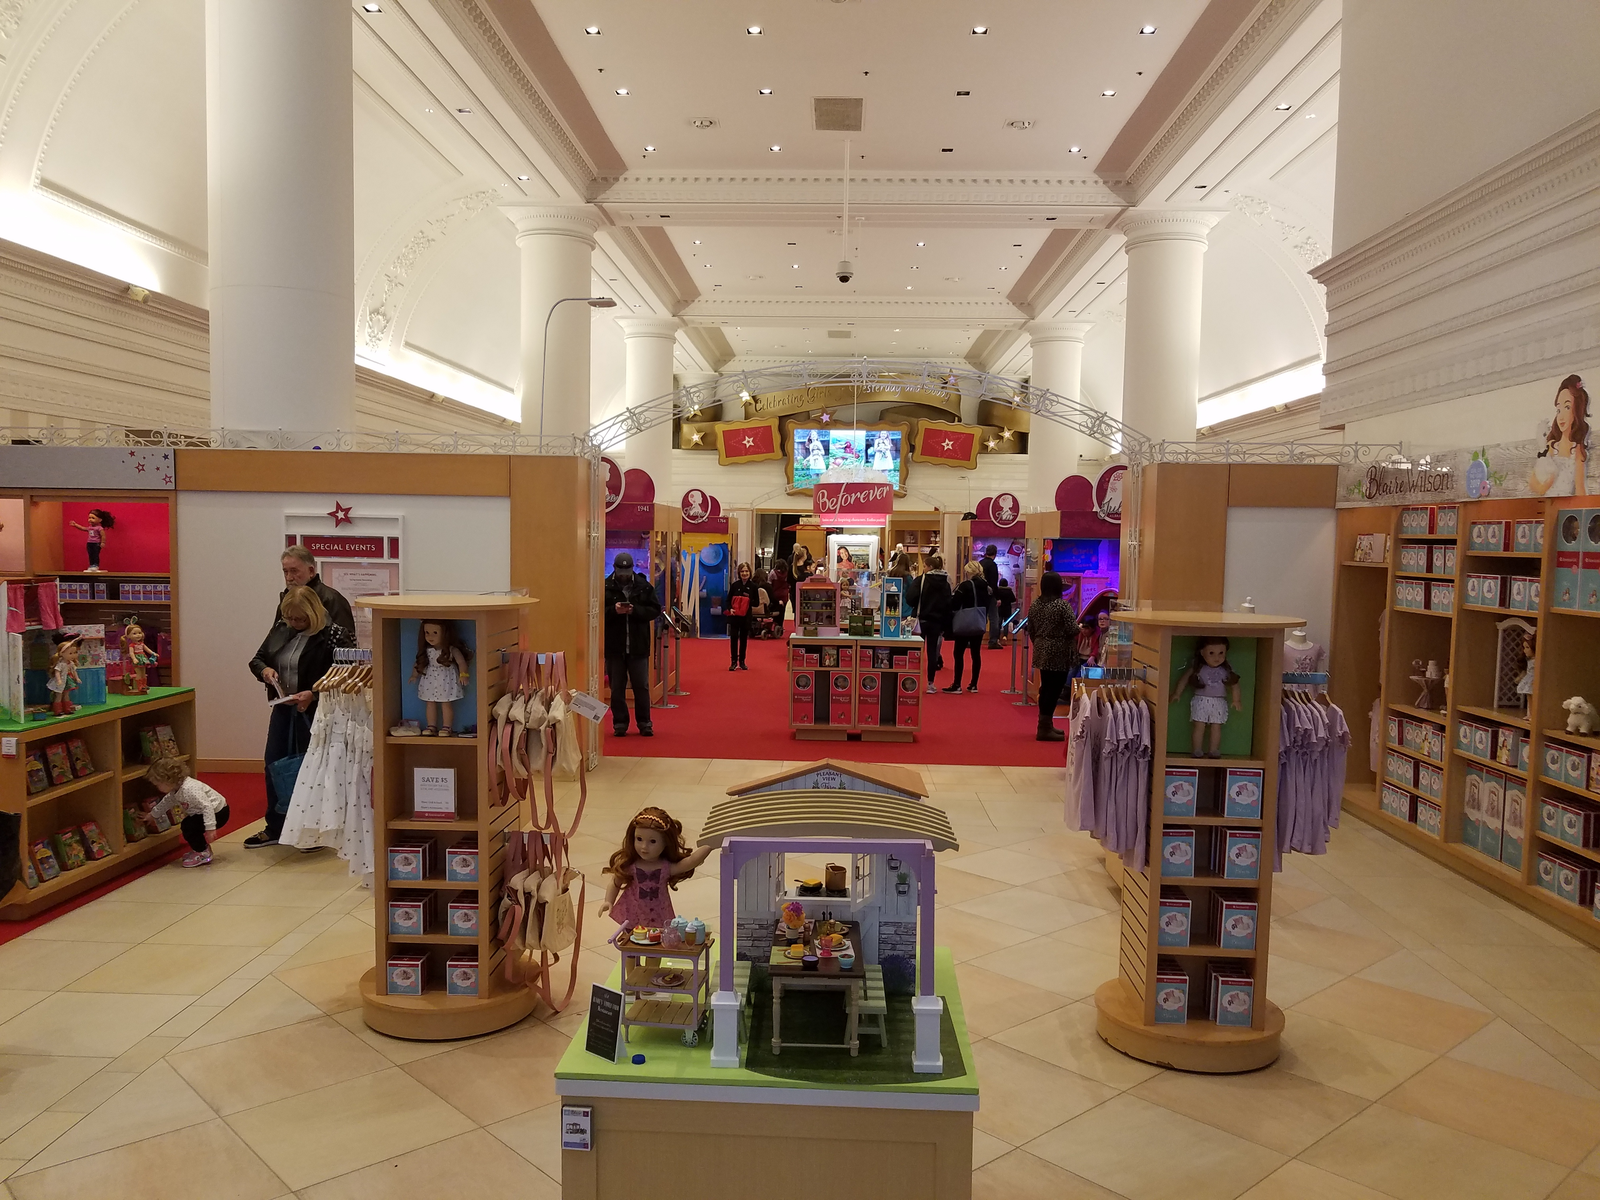 Parents with their daughters shopping some dolls and dollhouses in American Girl Place, in Chicago, one of the best toy stores in America